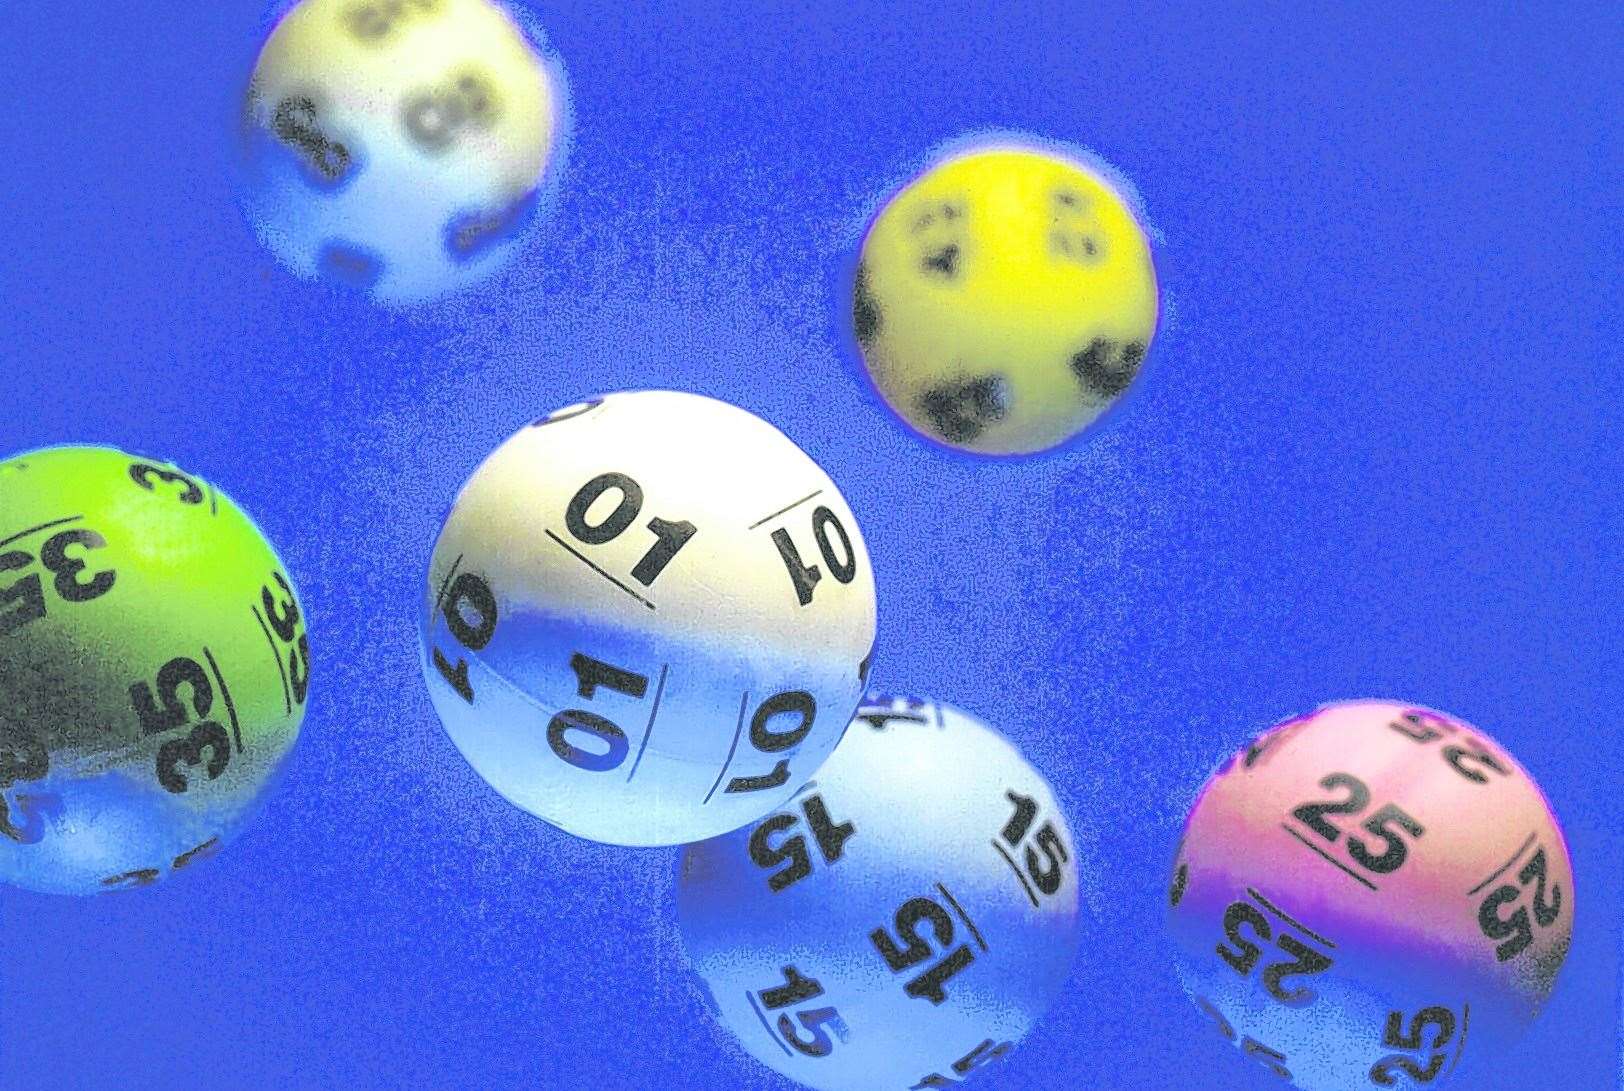 A mystery man has won £1 million in the lottery